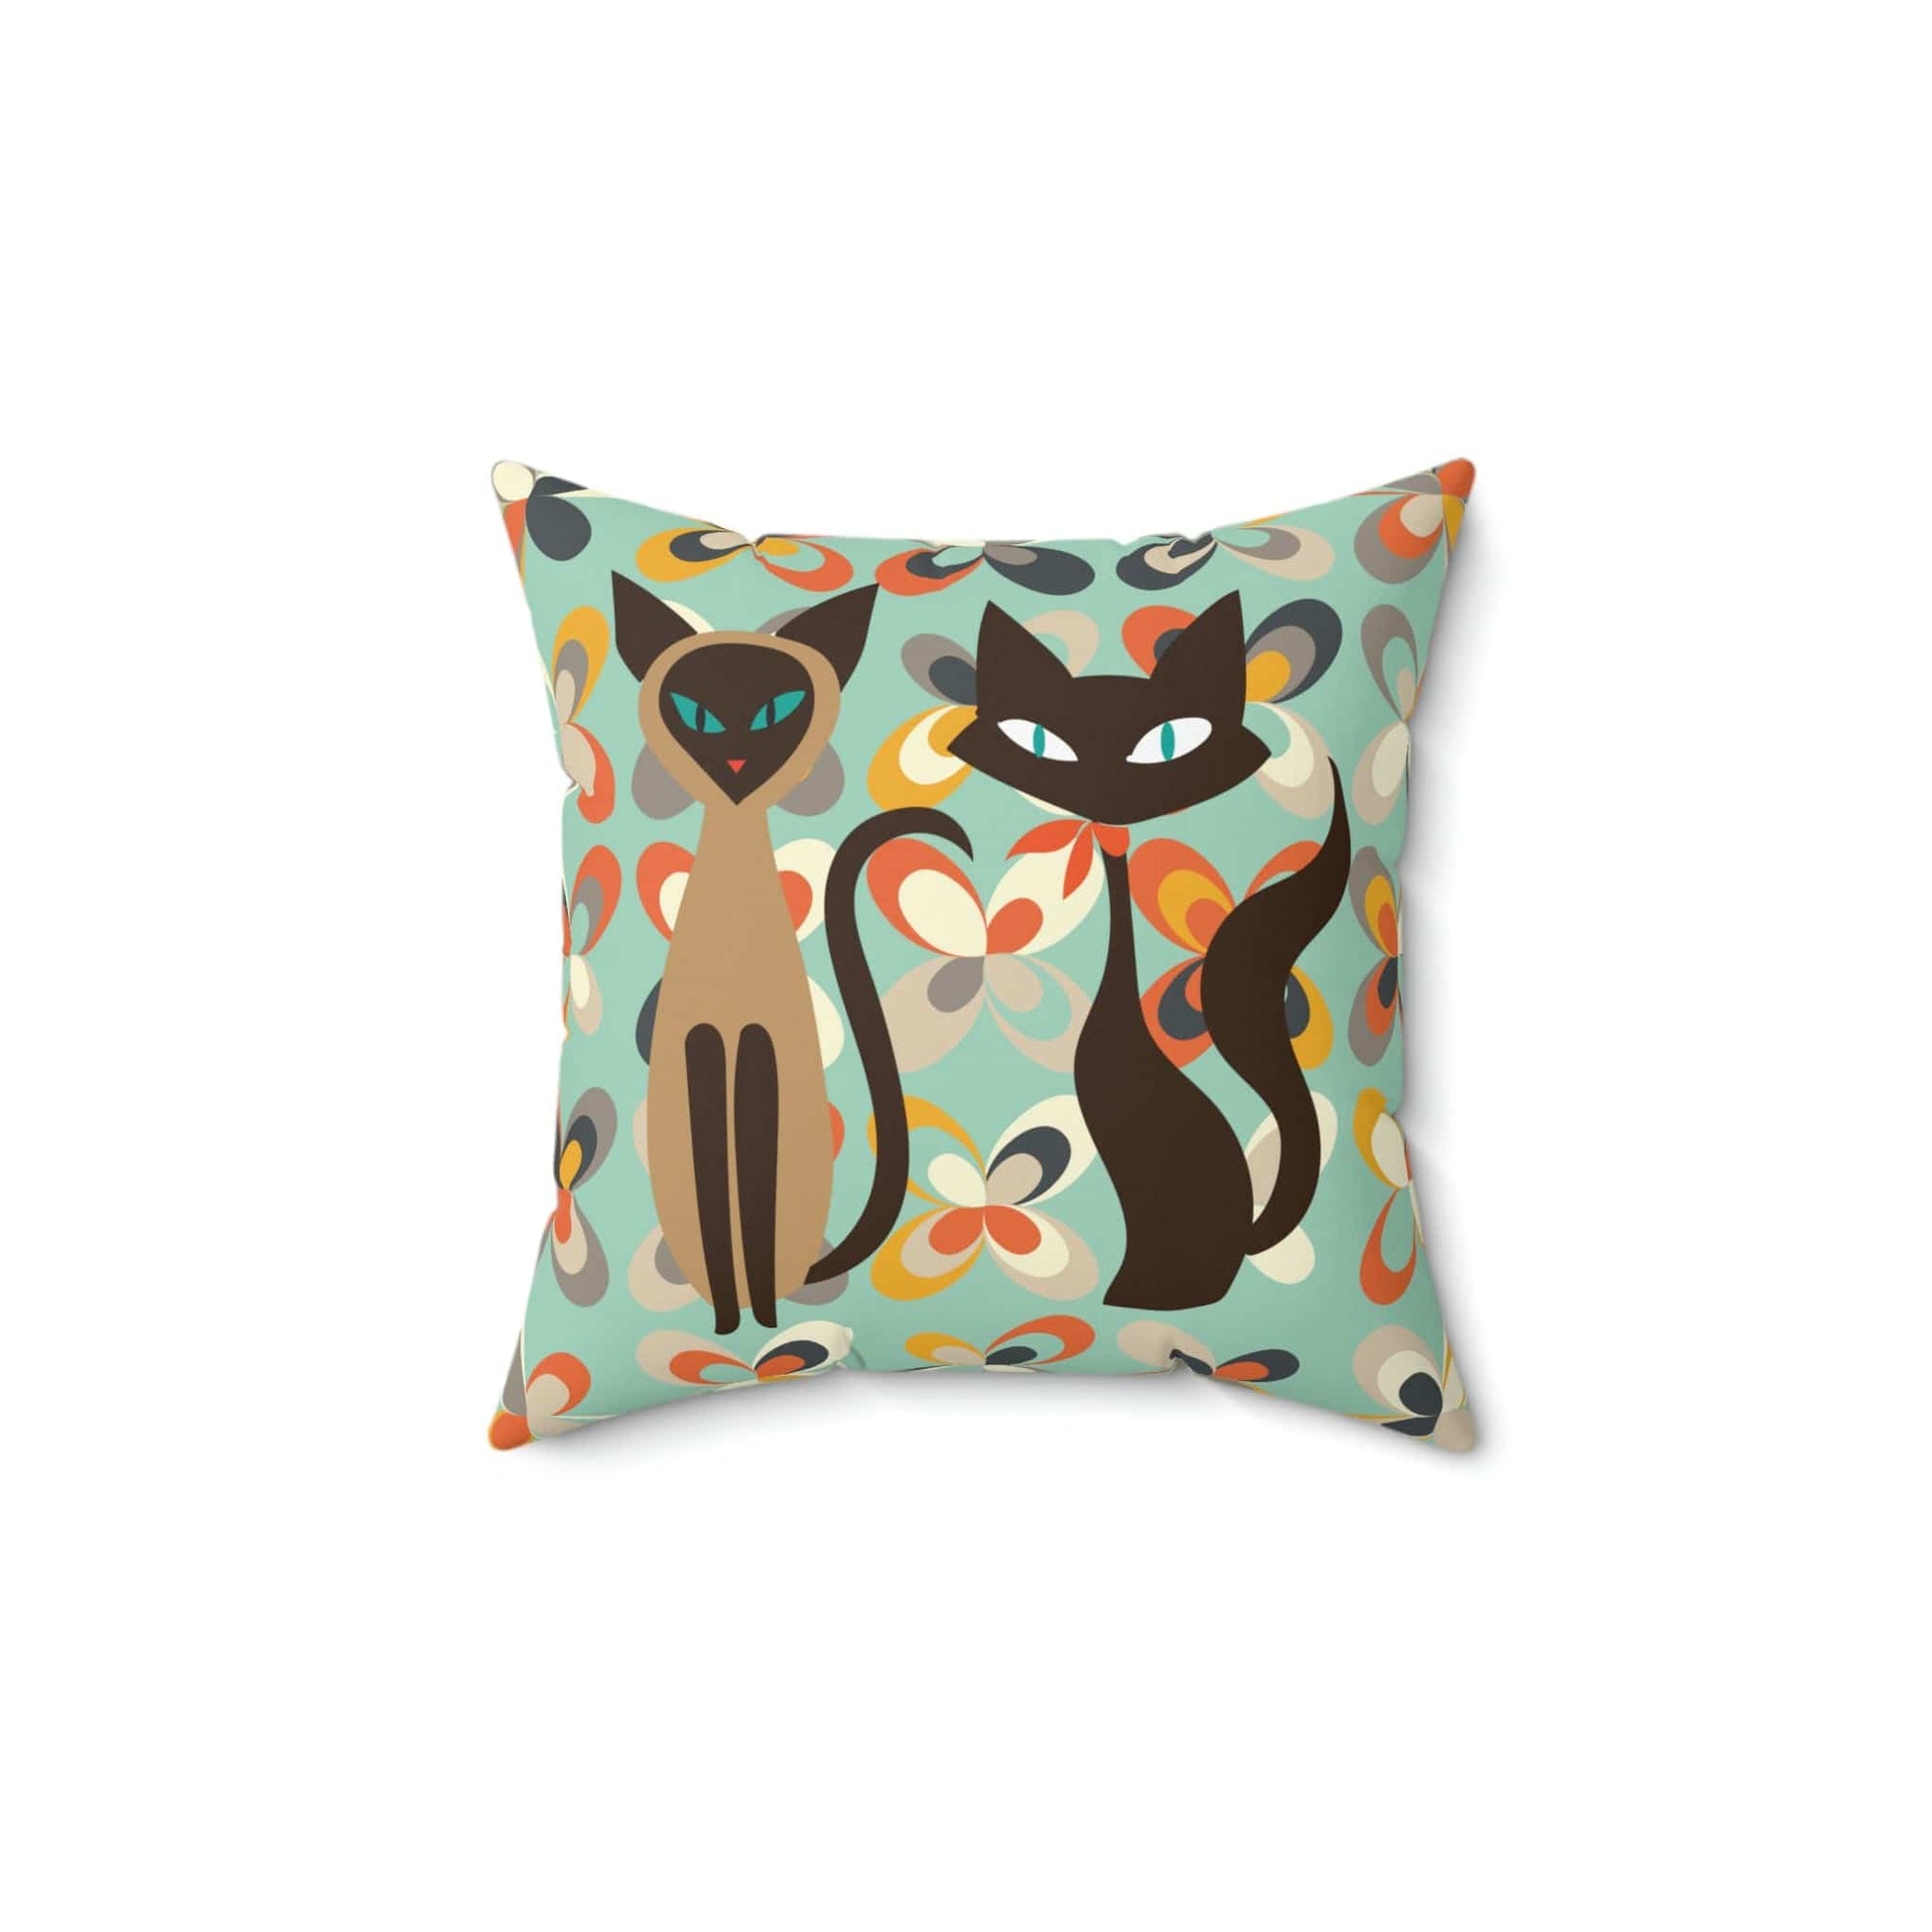 Kate McEnroe New York Mid Century Modern Atomic Cats Retro Suede Pillow Case Faux Suede Throw Pillow Covers 20" × 20" 27557605686927184381